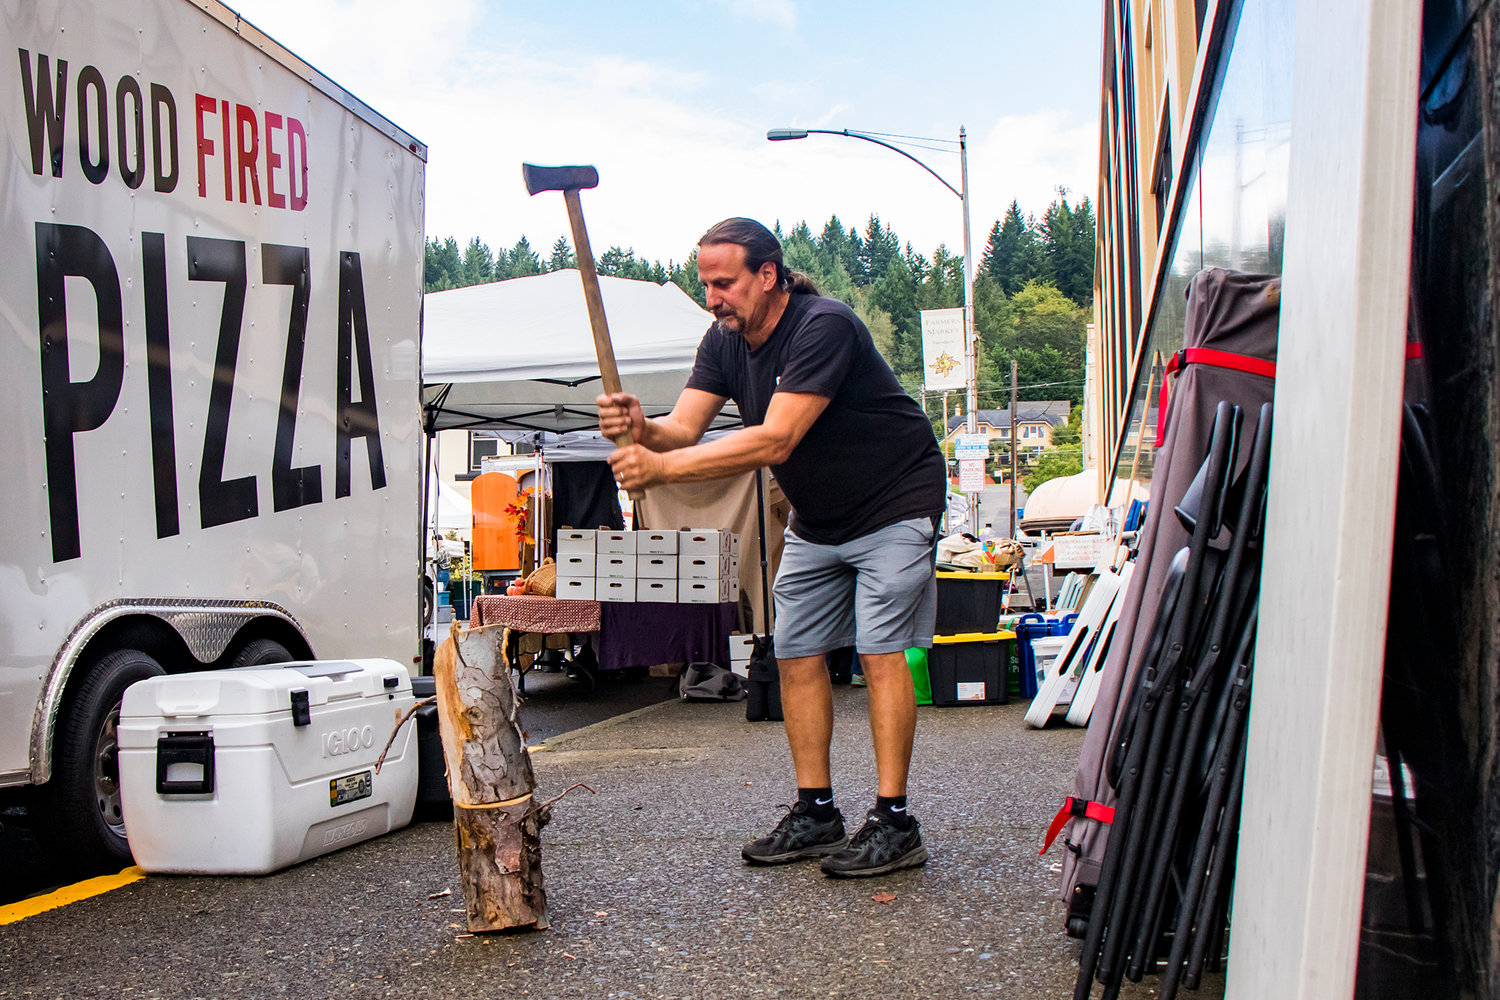 Brent Yerton chops wood on the sidewalk of NE Boistfort Street, for the Milltown Pizza food cart Tuesday afternoon in Chehalis.